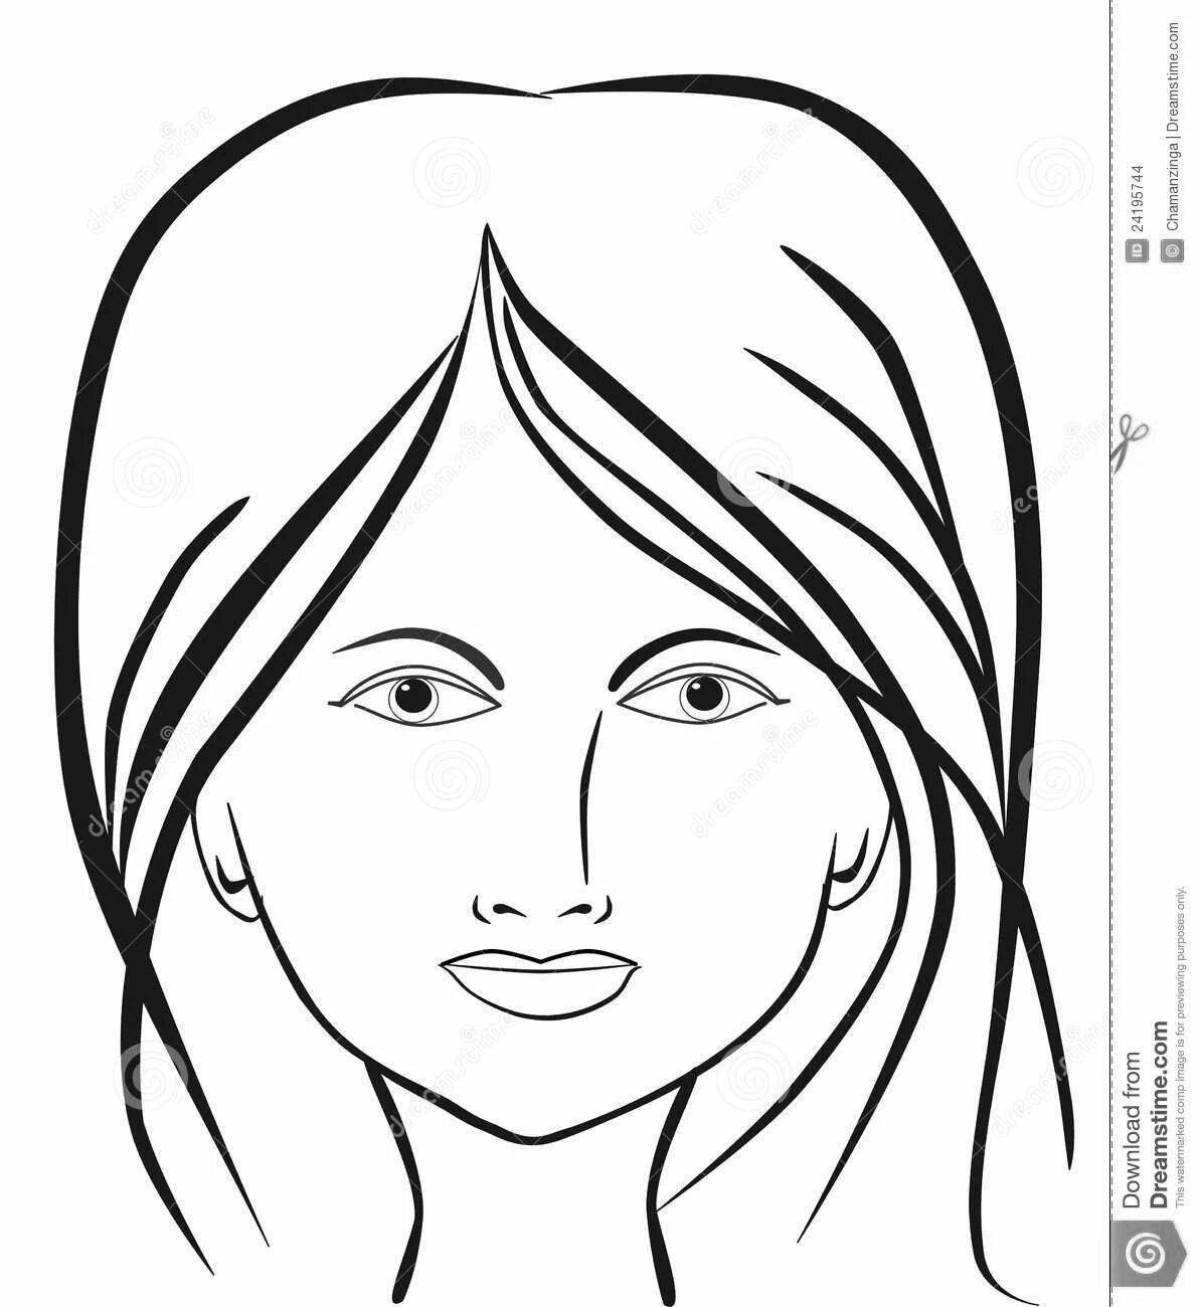 Joyful coloring portrait of mother for children 6-7 years old